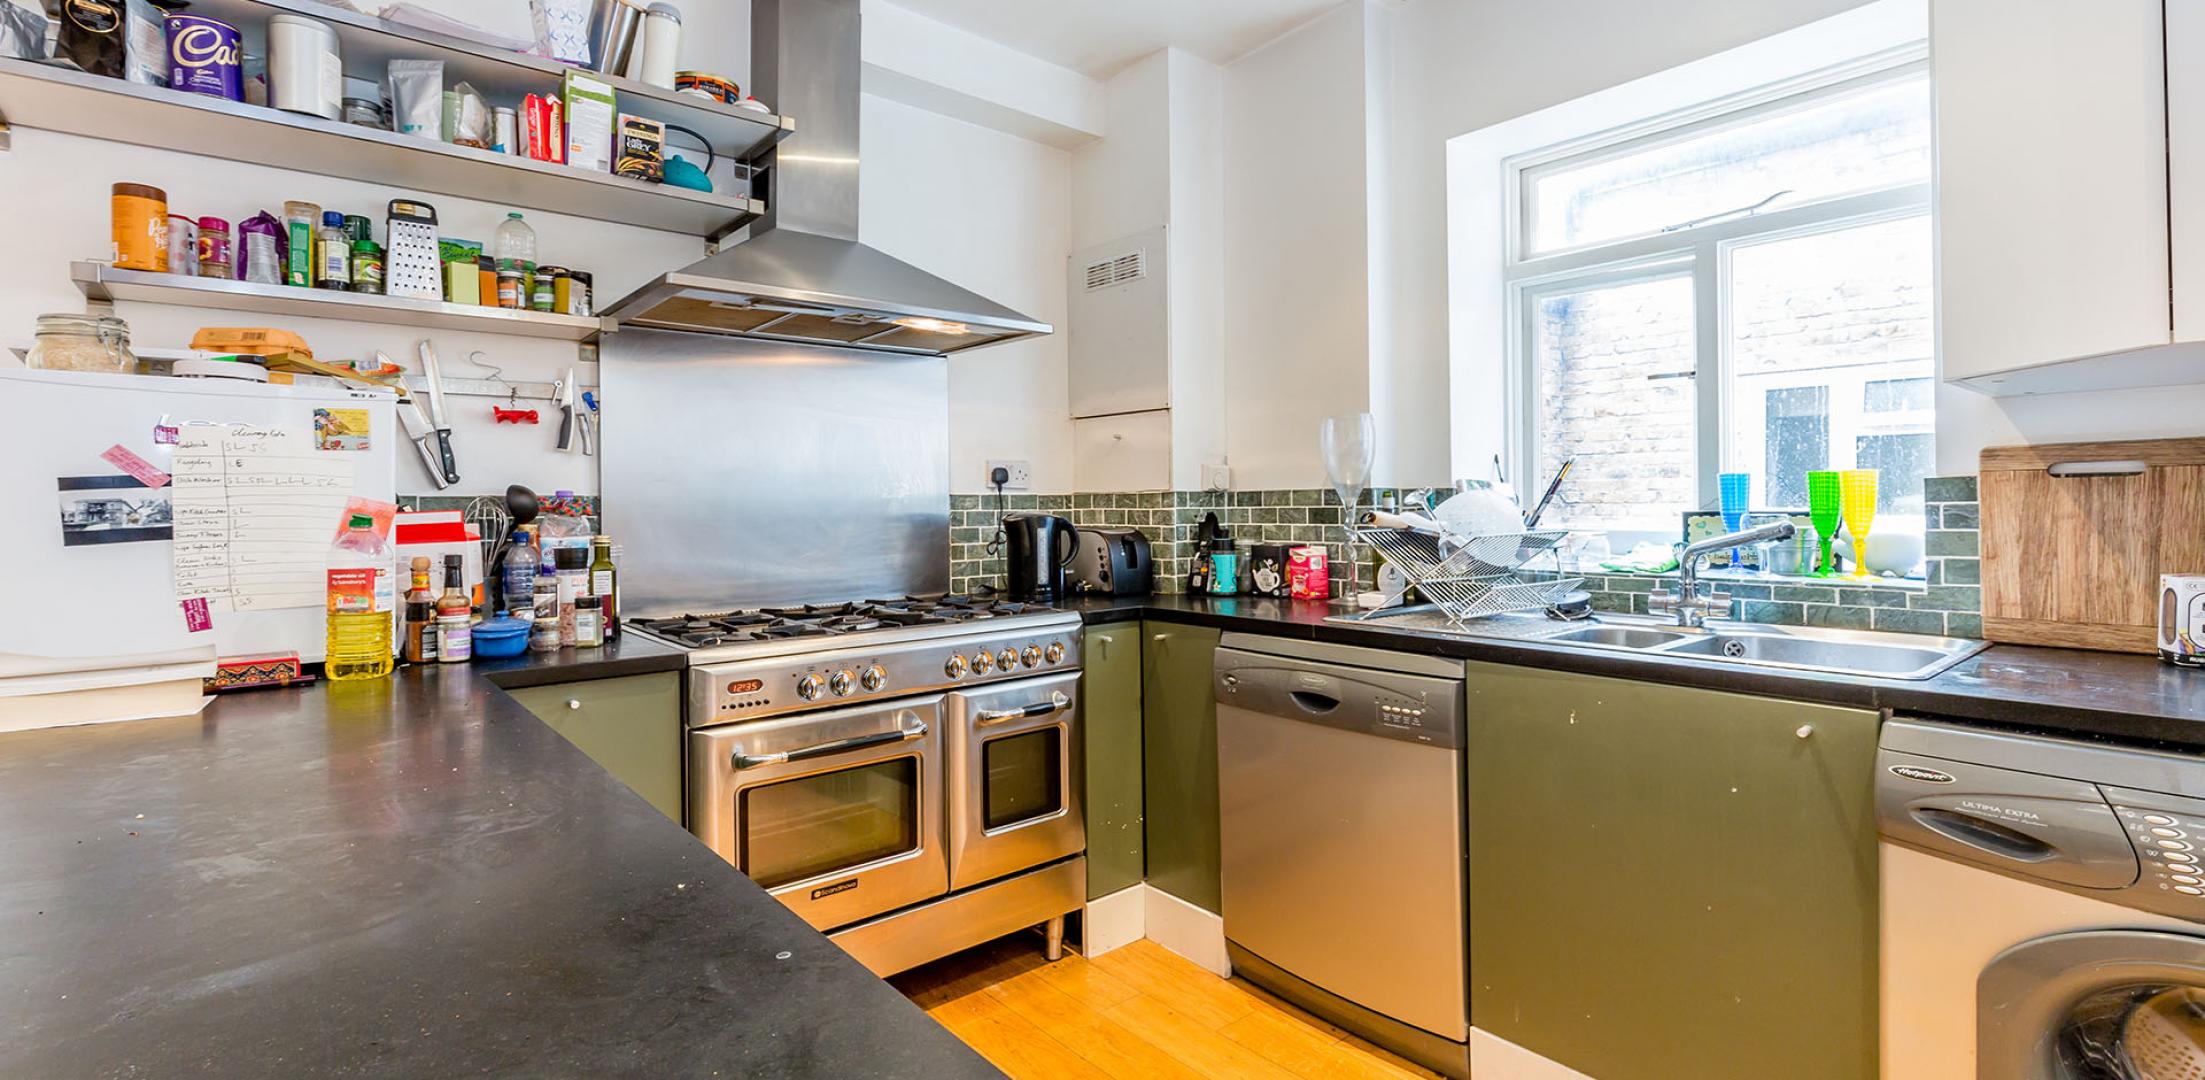 			RENT INCLUSIVE OF CTAX!, 3 Bedroom, 1 bath, 1 reception Flat			 Coniston Road, Crouch End